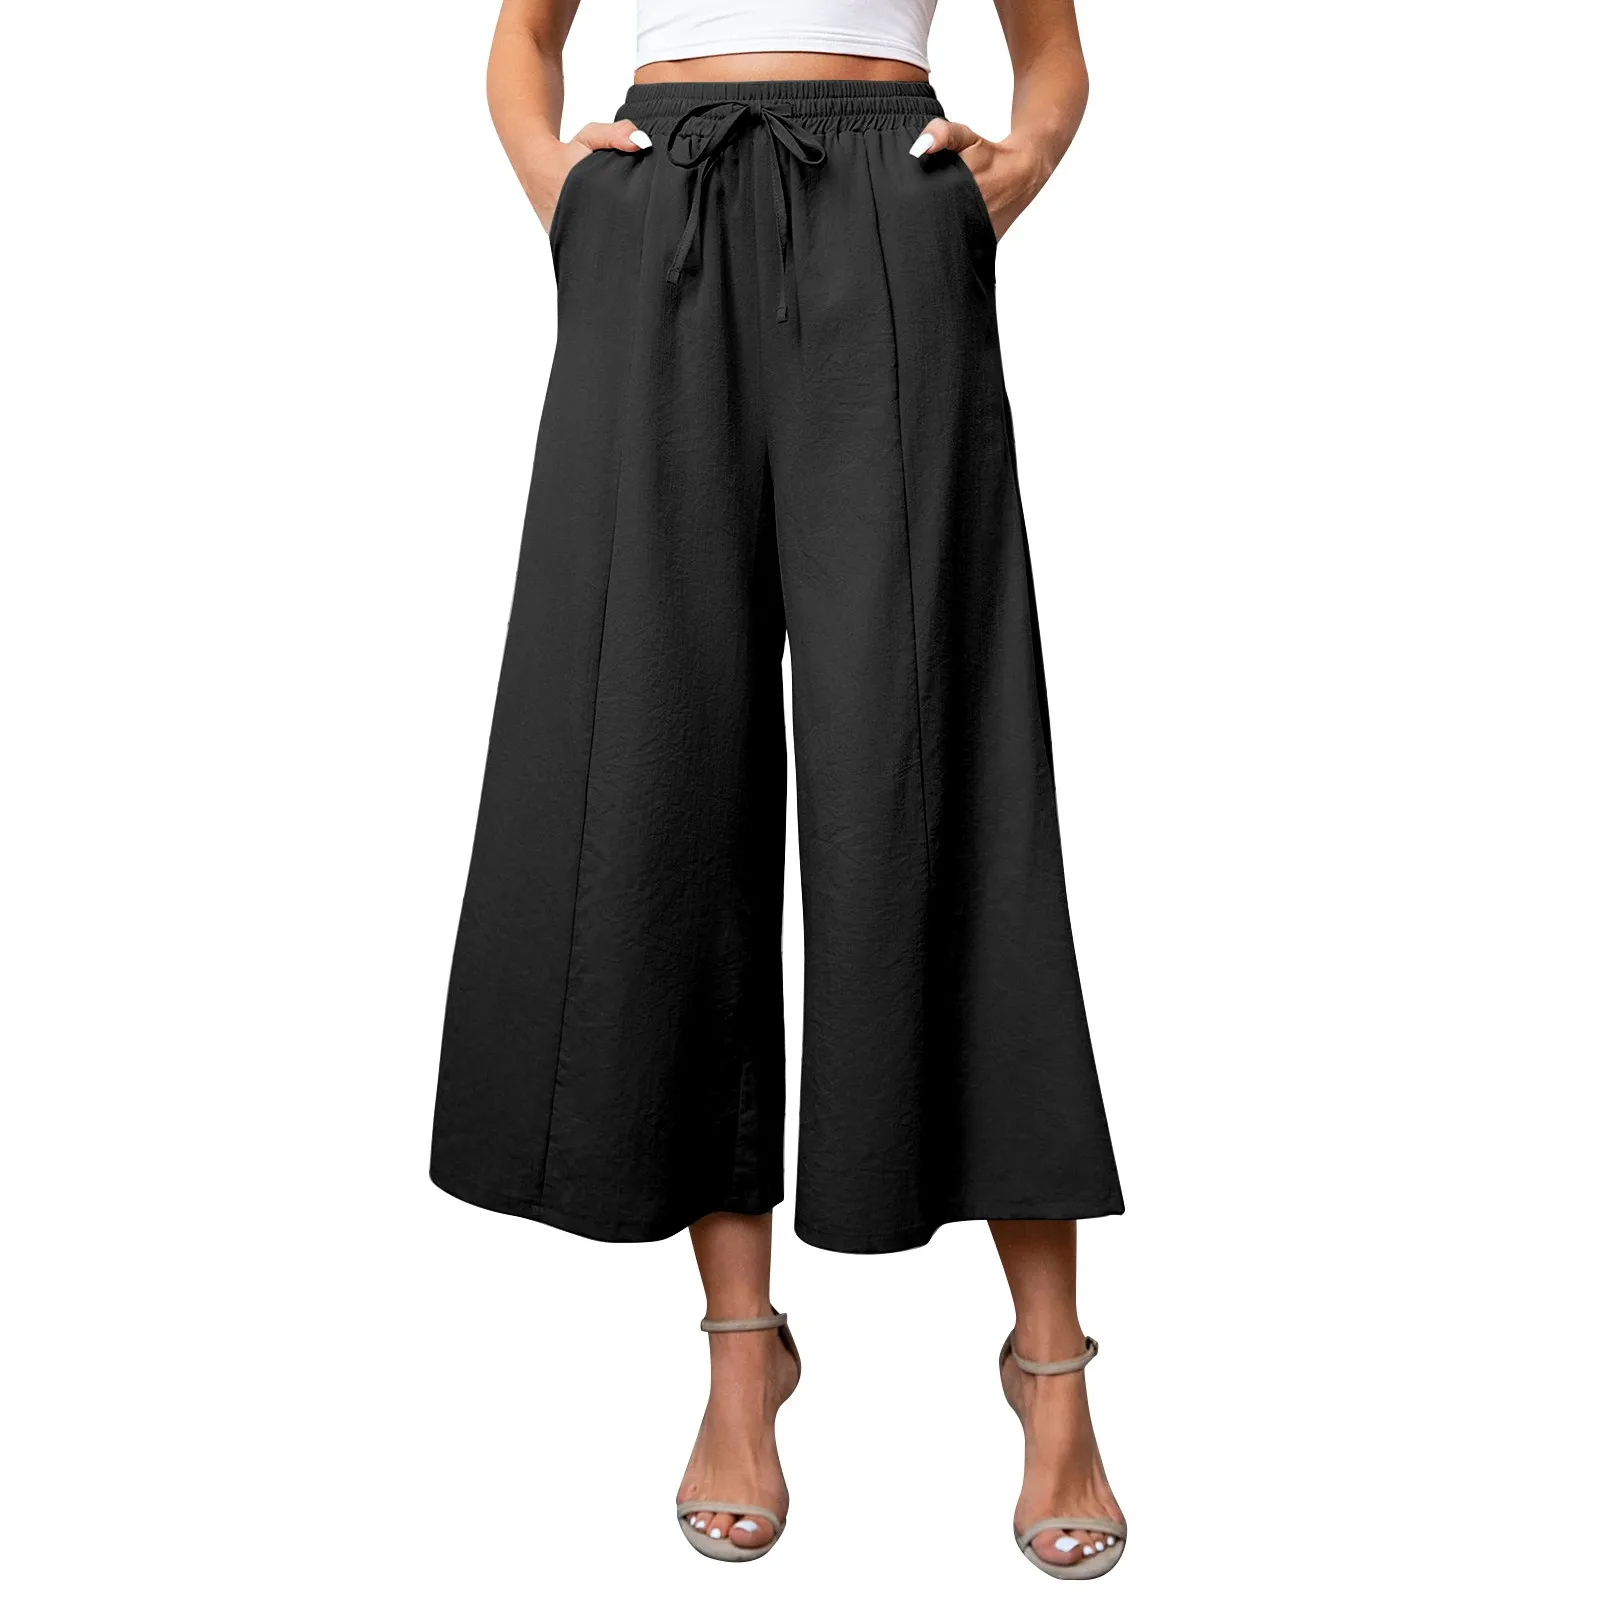 Wide Leg Linen Pants for Women Spring Summer Comfort Elastic Waist Cropped Trousers Solid Pockets Cotton Loose Straight Pants